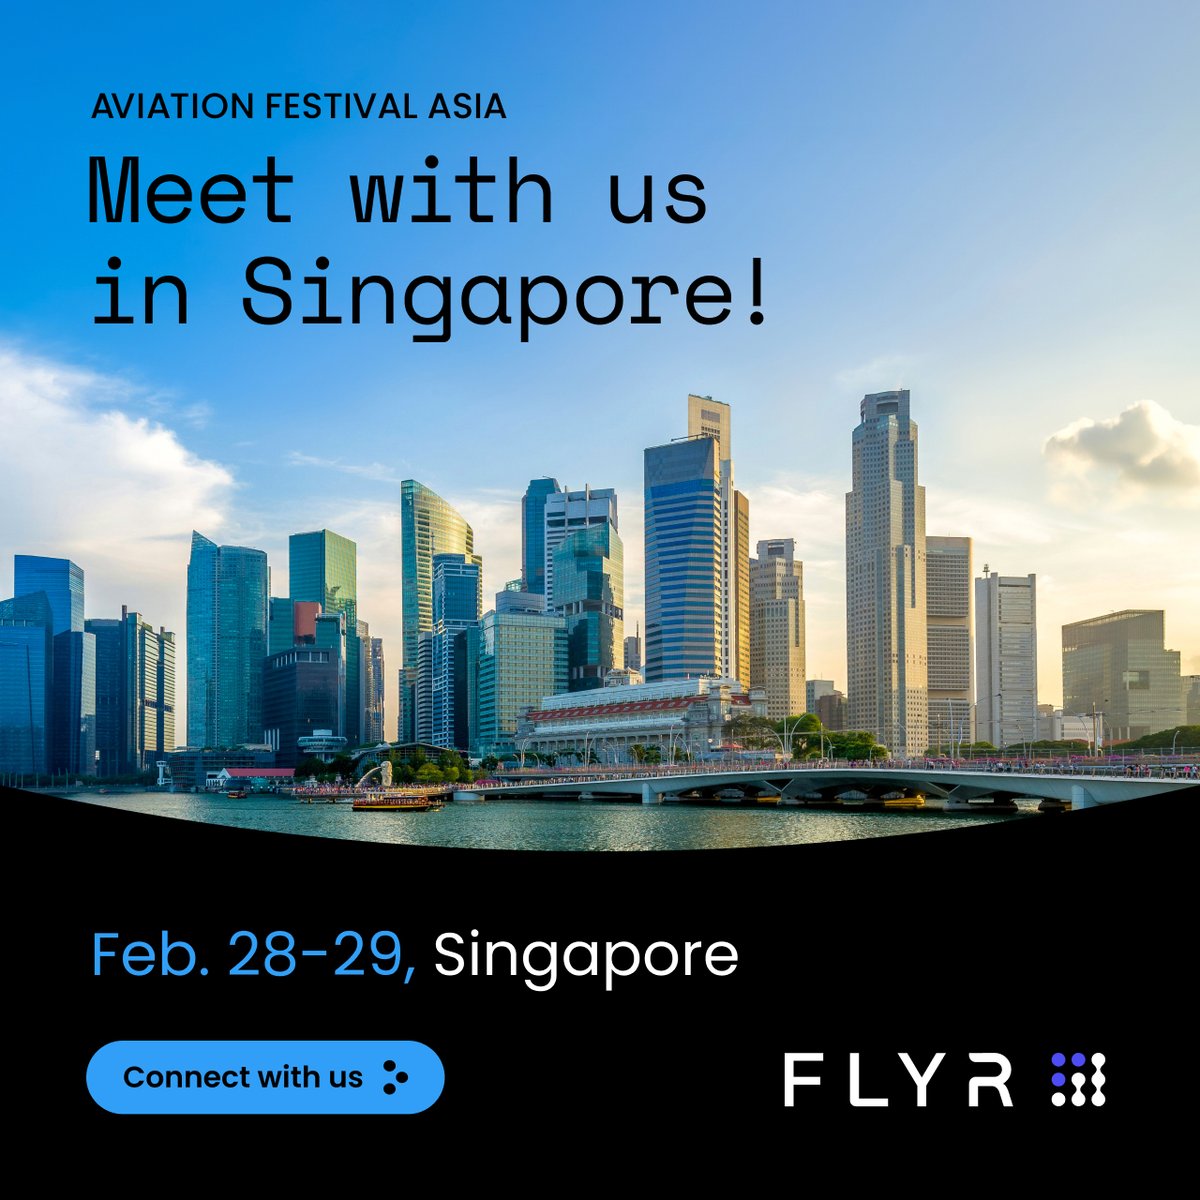 We hope to see many of you in Singapore this week! AFA Singapore kicks off 28-29 February and we're looking forward to a great event. To learn more about FLYR visit us at booth #D05 while at Aviation Festival Asia Singapore. #AviationFestivalAsia #TravelTechnology #Innovation